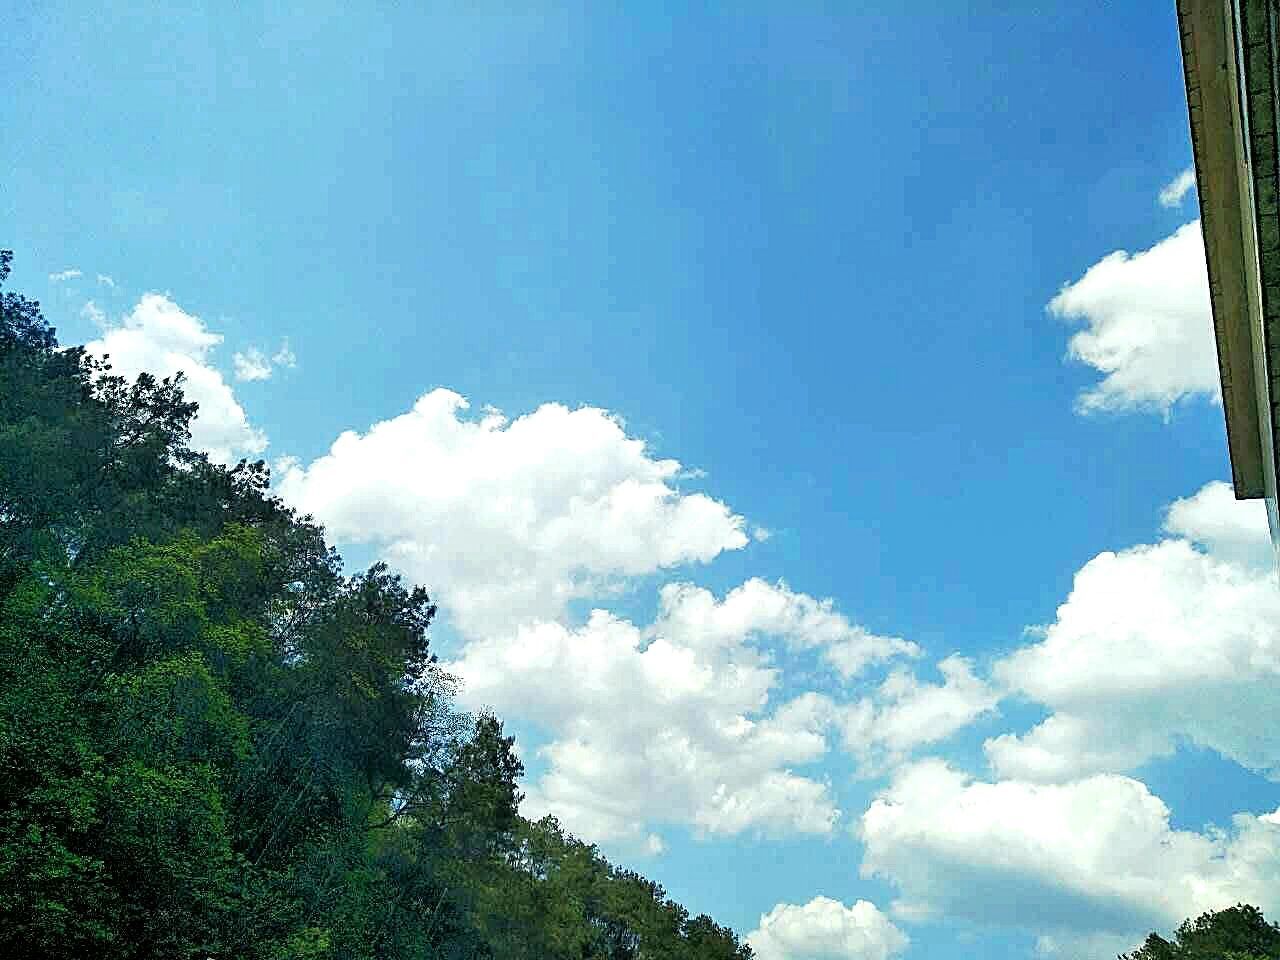 blue, sky, nature, cloud - sky, low angle view, tree, beauty in nature, scenics, idyllic, forest, environment, backgrounds, no people, day, tranquility, growth, green color, treetop, outdoors, close-up